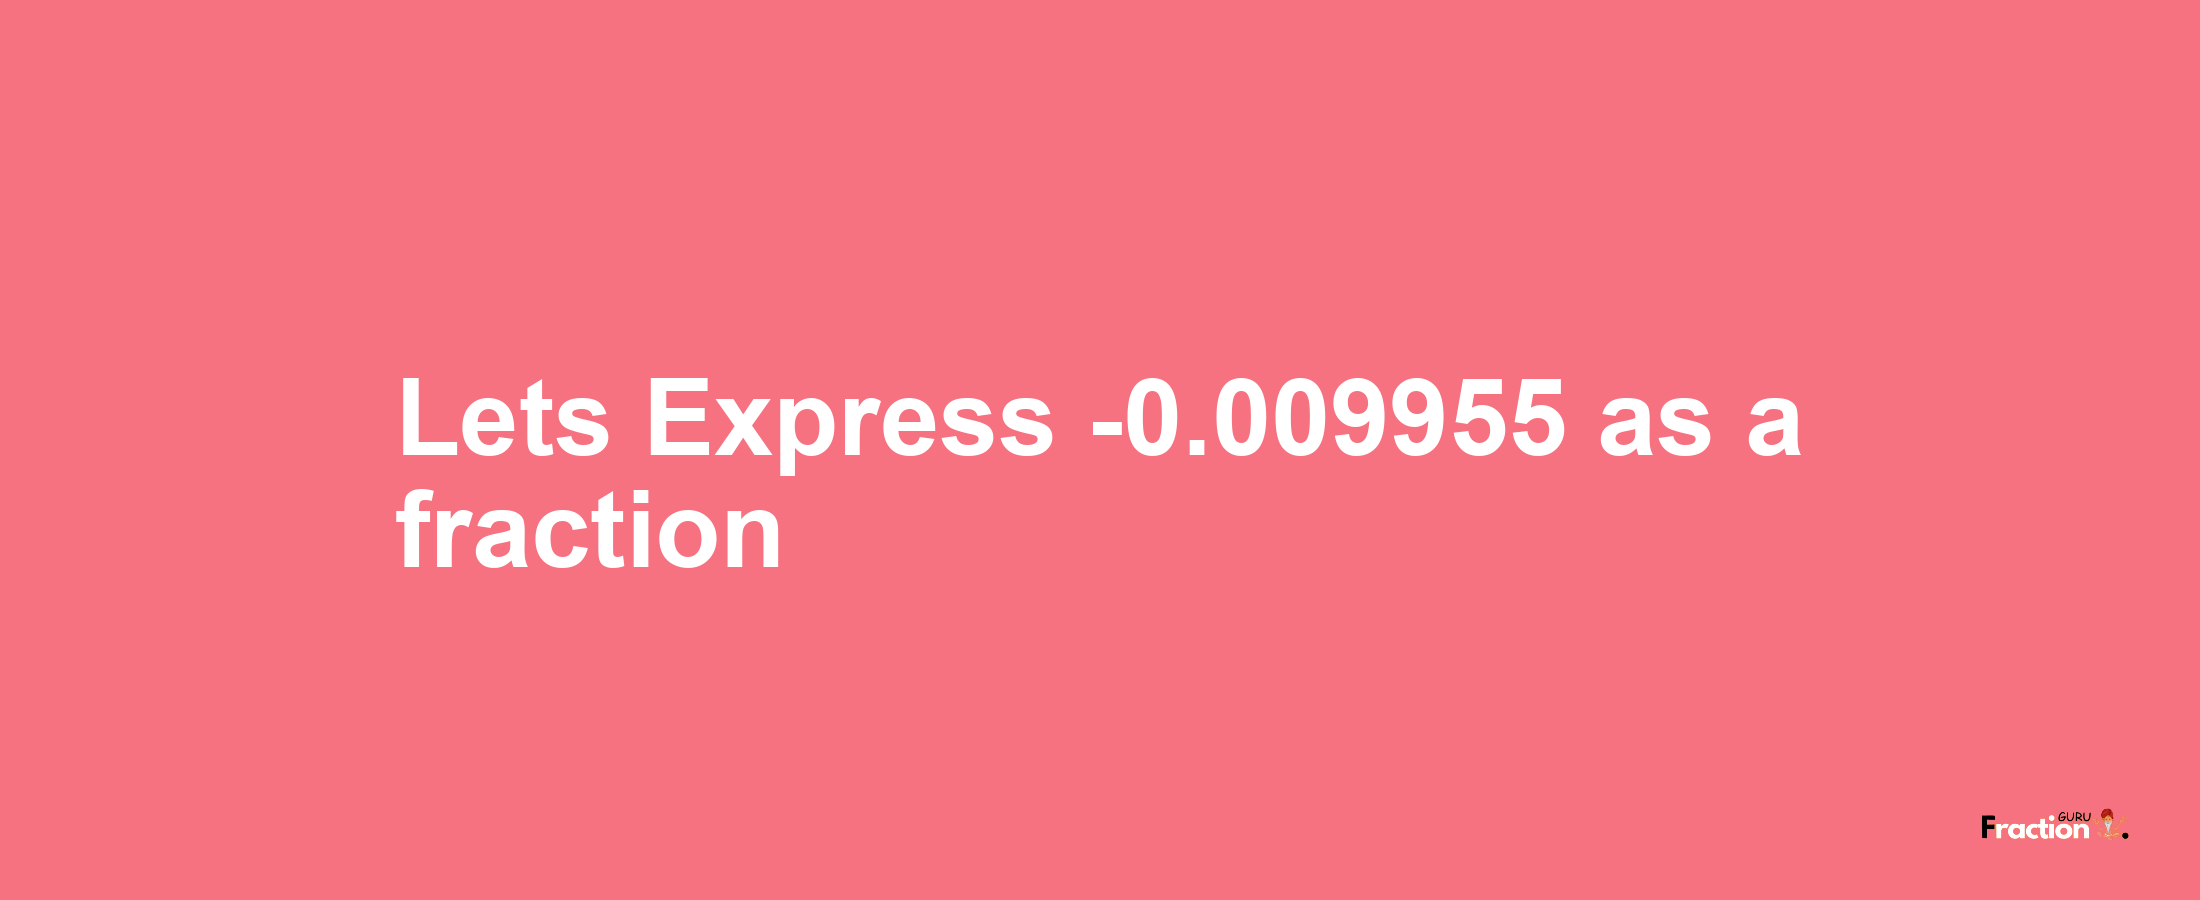 Lets Express -0.009955 as afraction